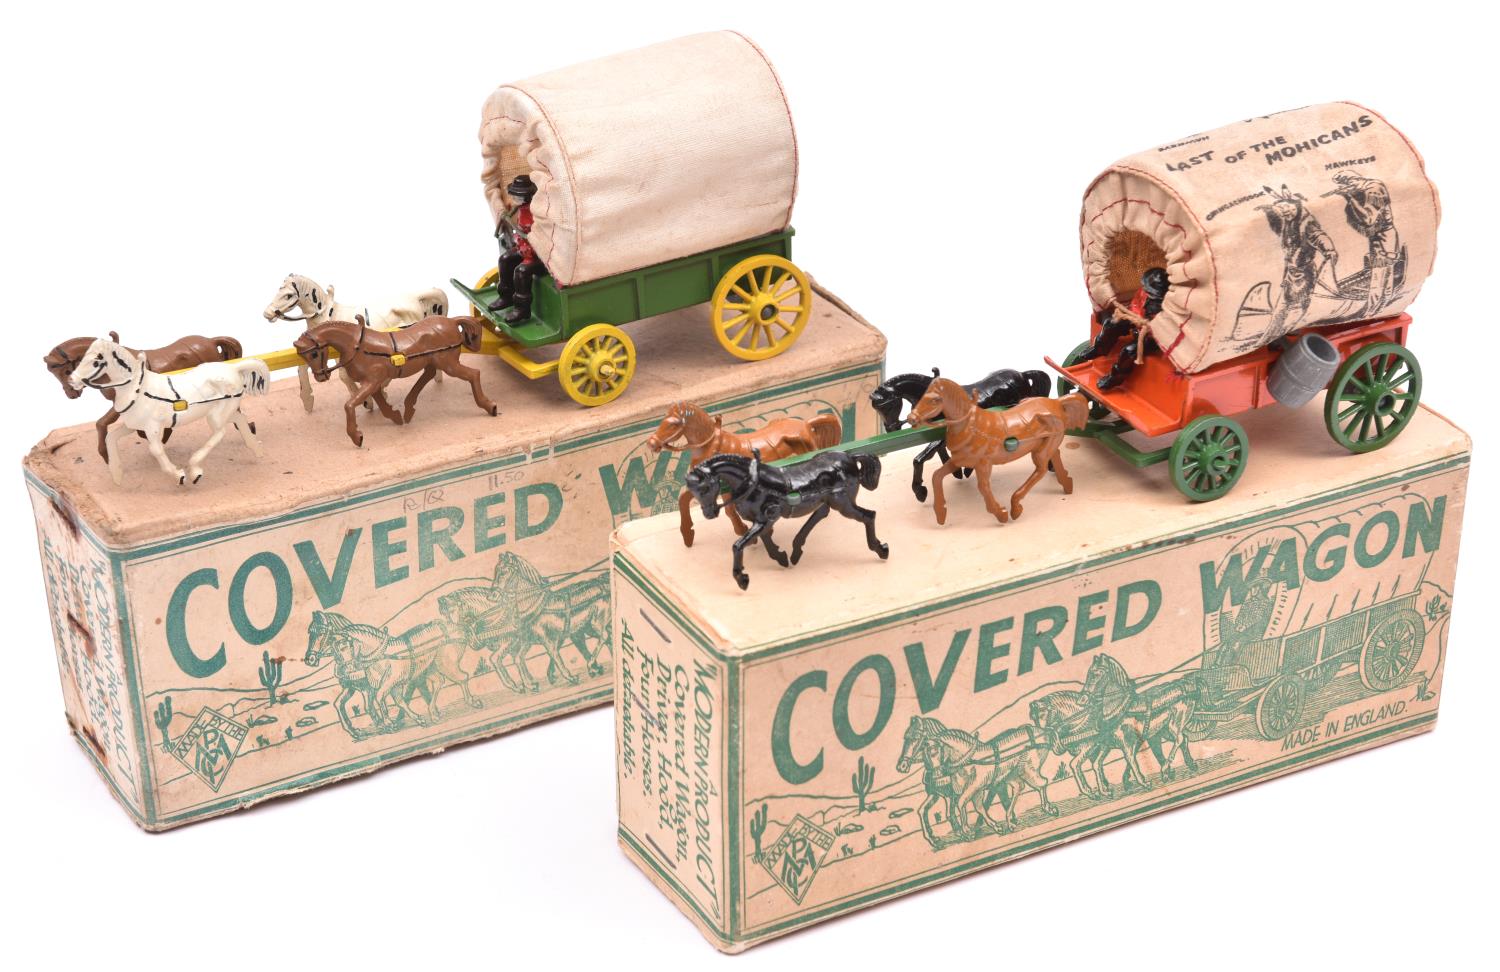 2 Modern Products Covered Wagons. One in green with yellow wheels, a plain canvas tilt, 4 horses and